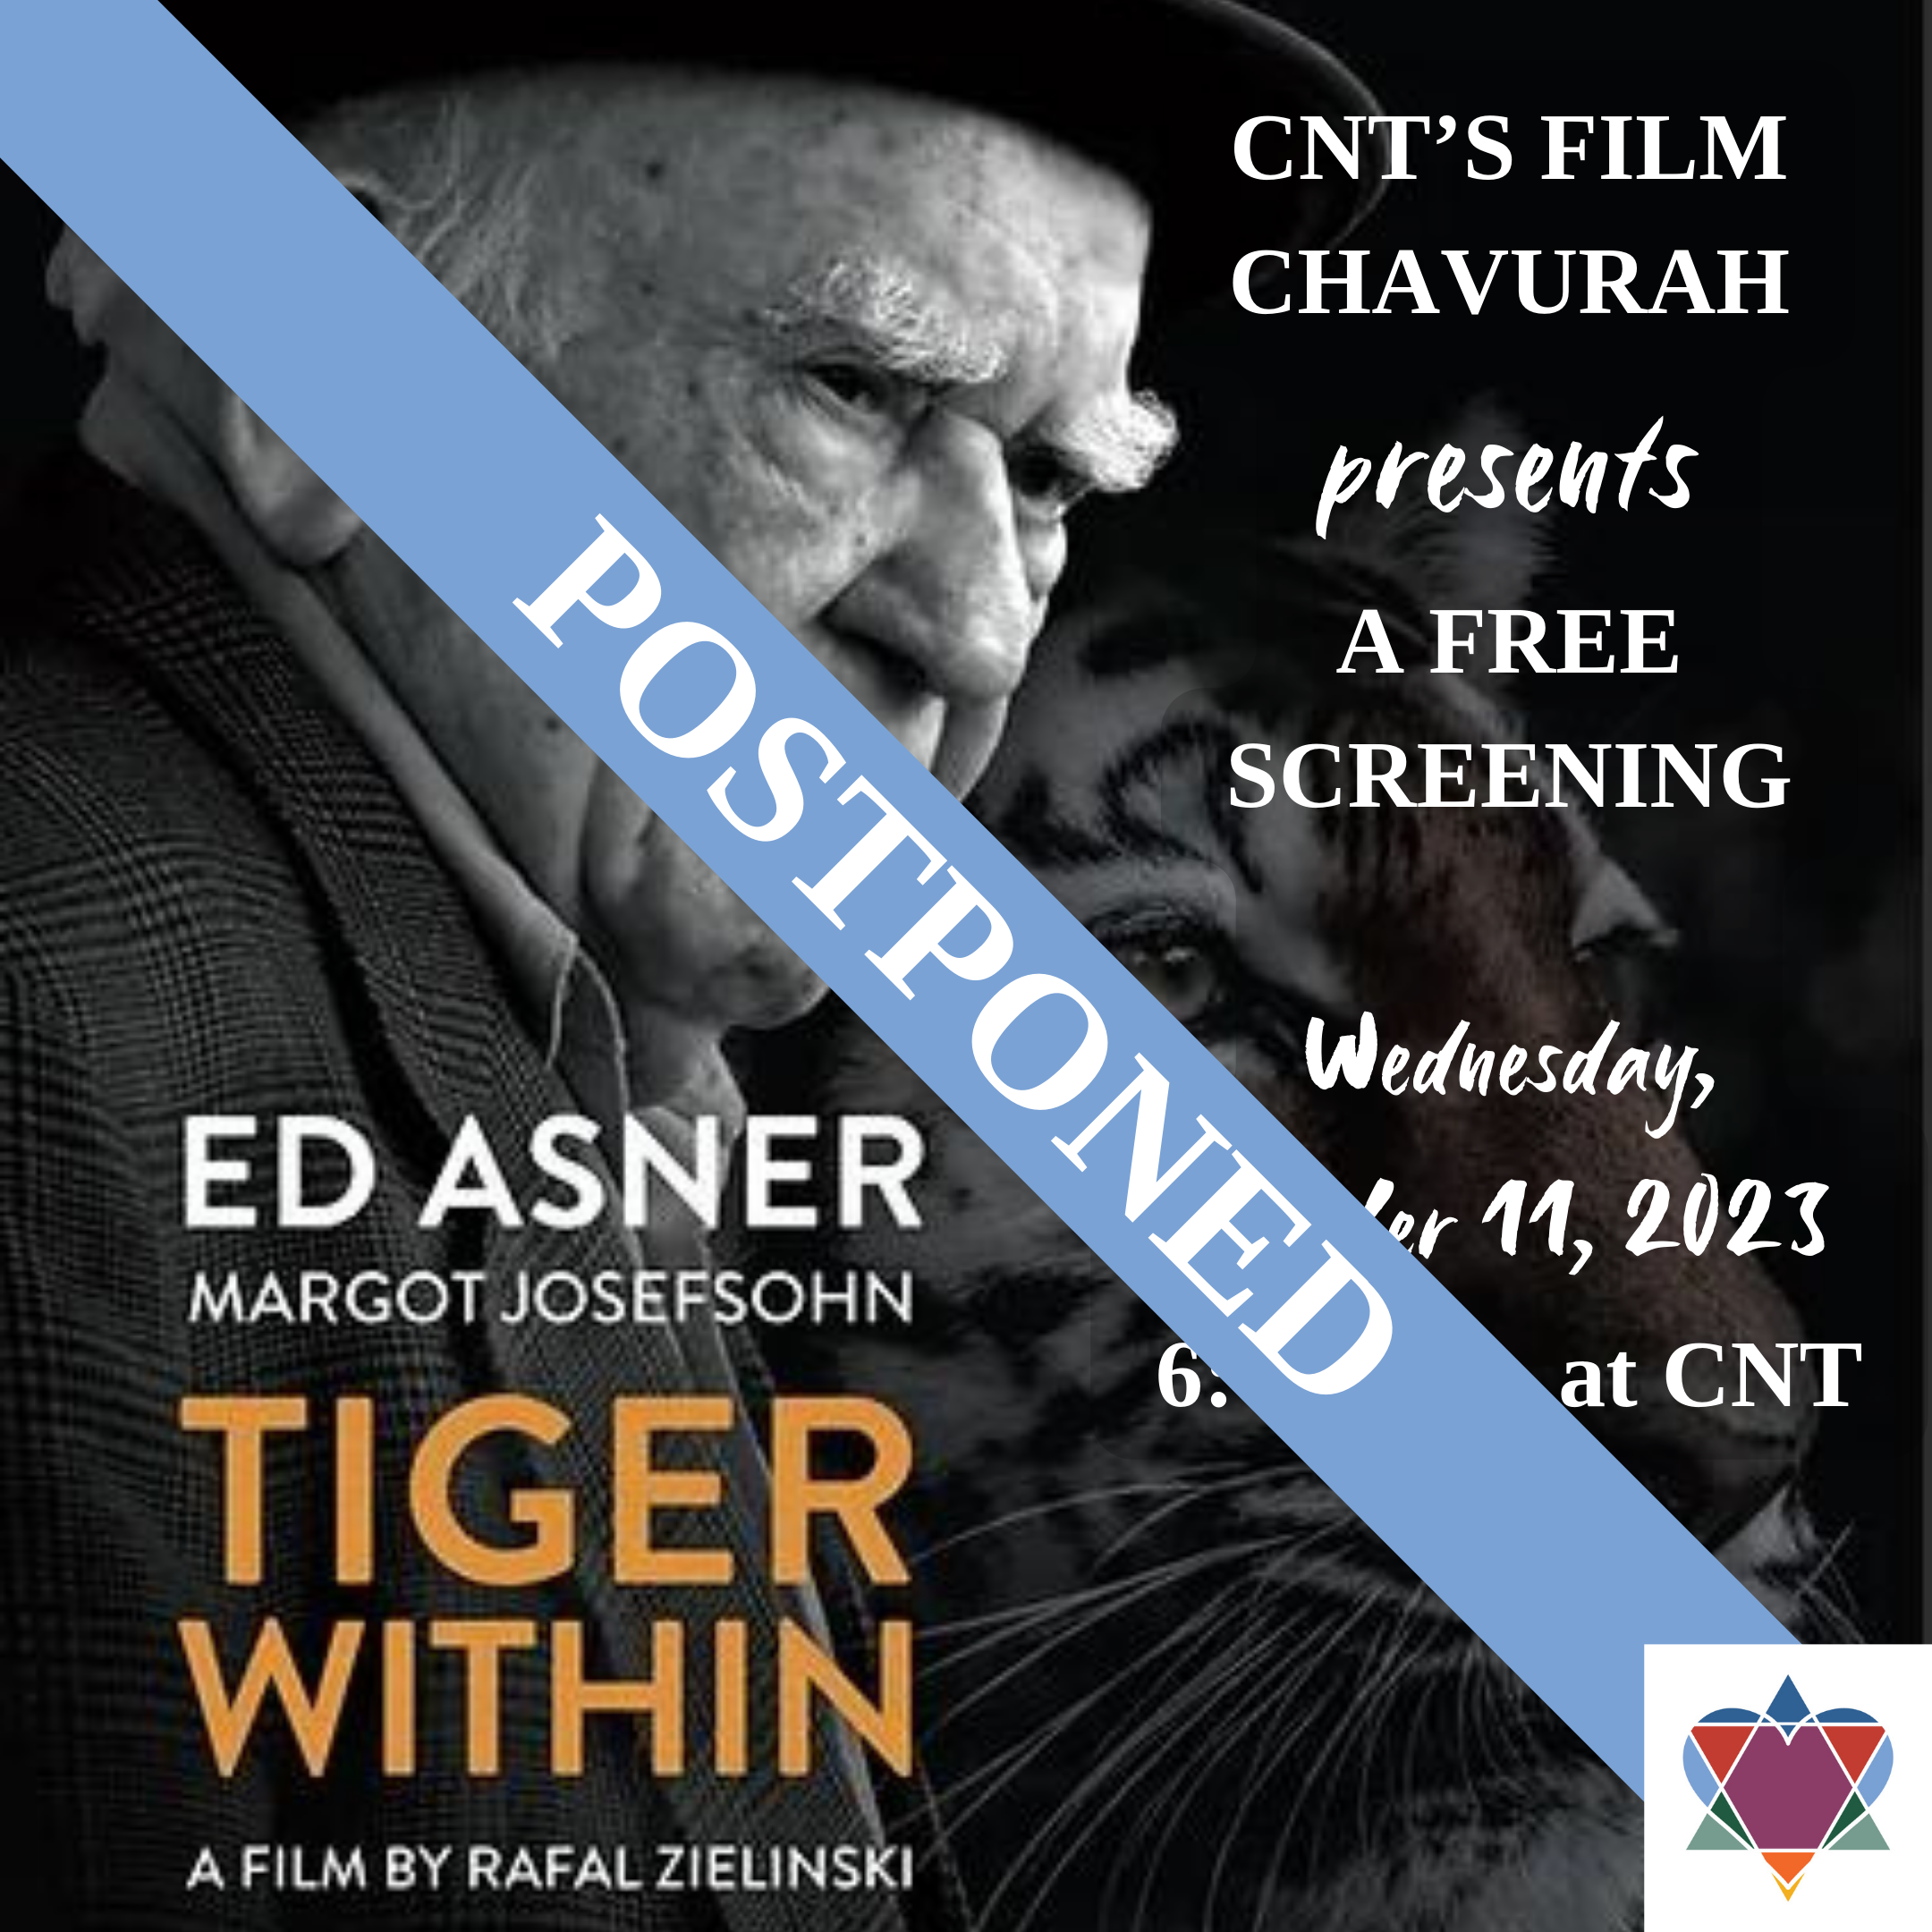 CNT'S FILM CHAVURAH PRESENTS TIGER WITHIN